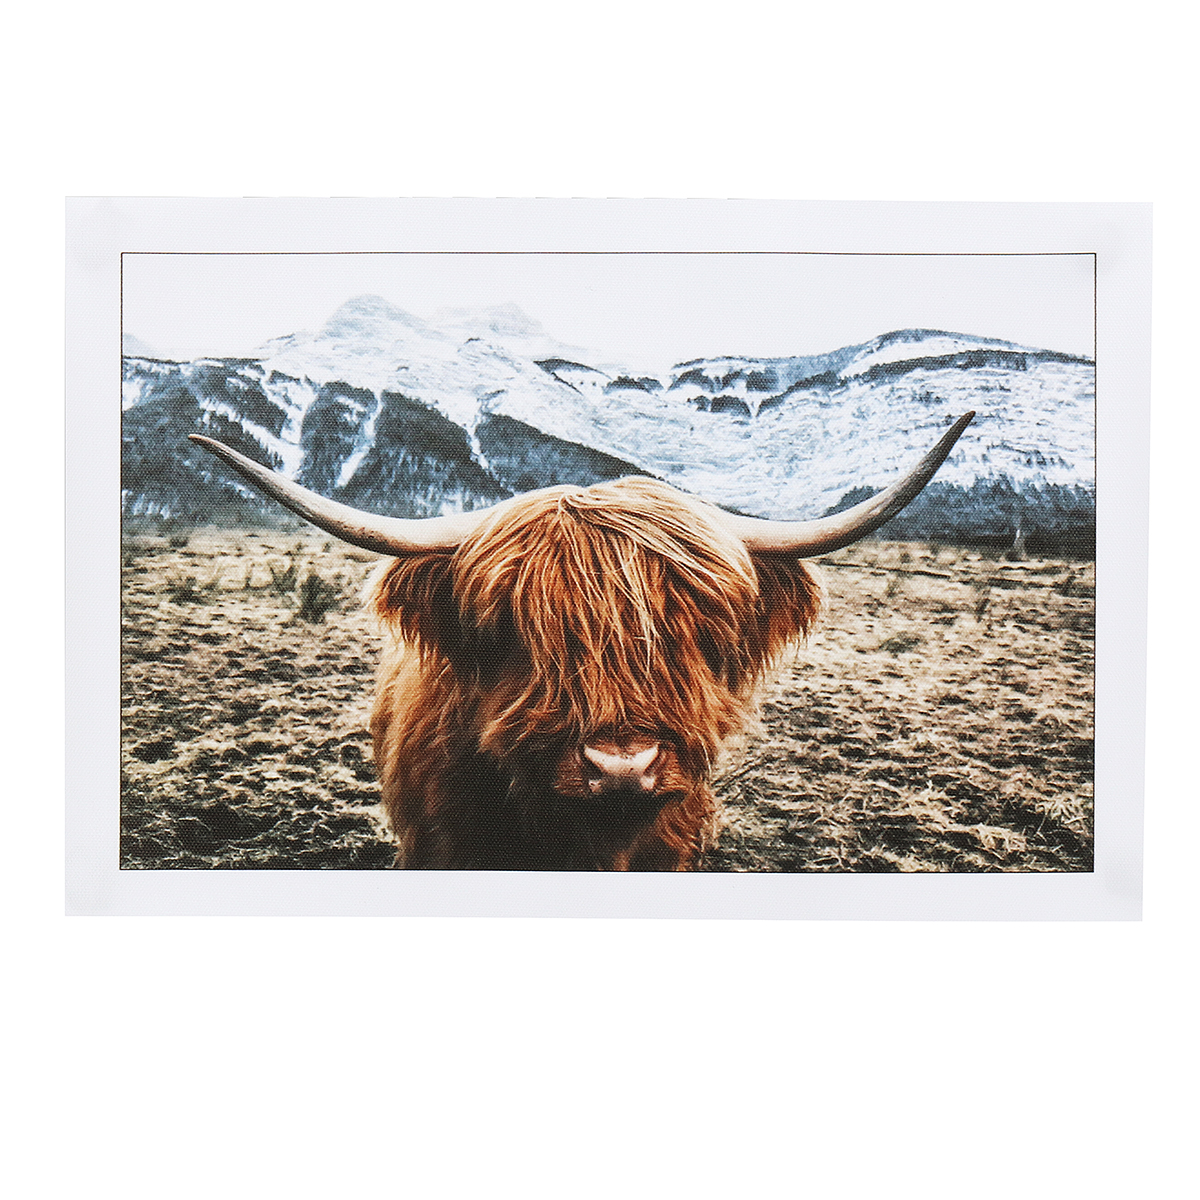 1-Piece-Canvas-Print-Painting-Highland-Cow-Poster-Wall-Decorative-Printing-Art-Pictures-Frameless-Wa-1743443-10